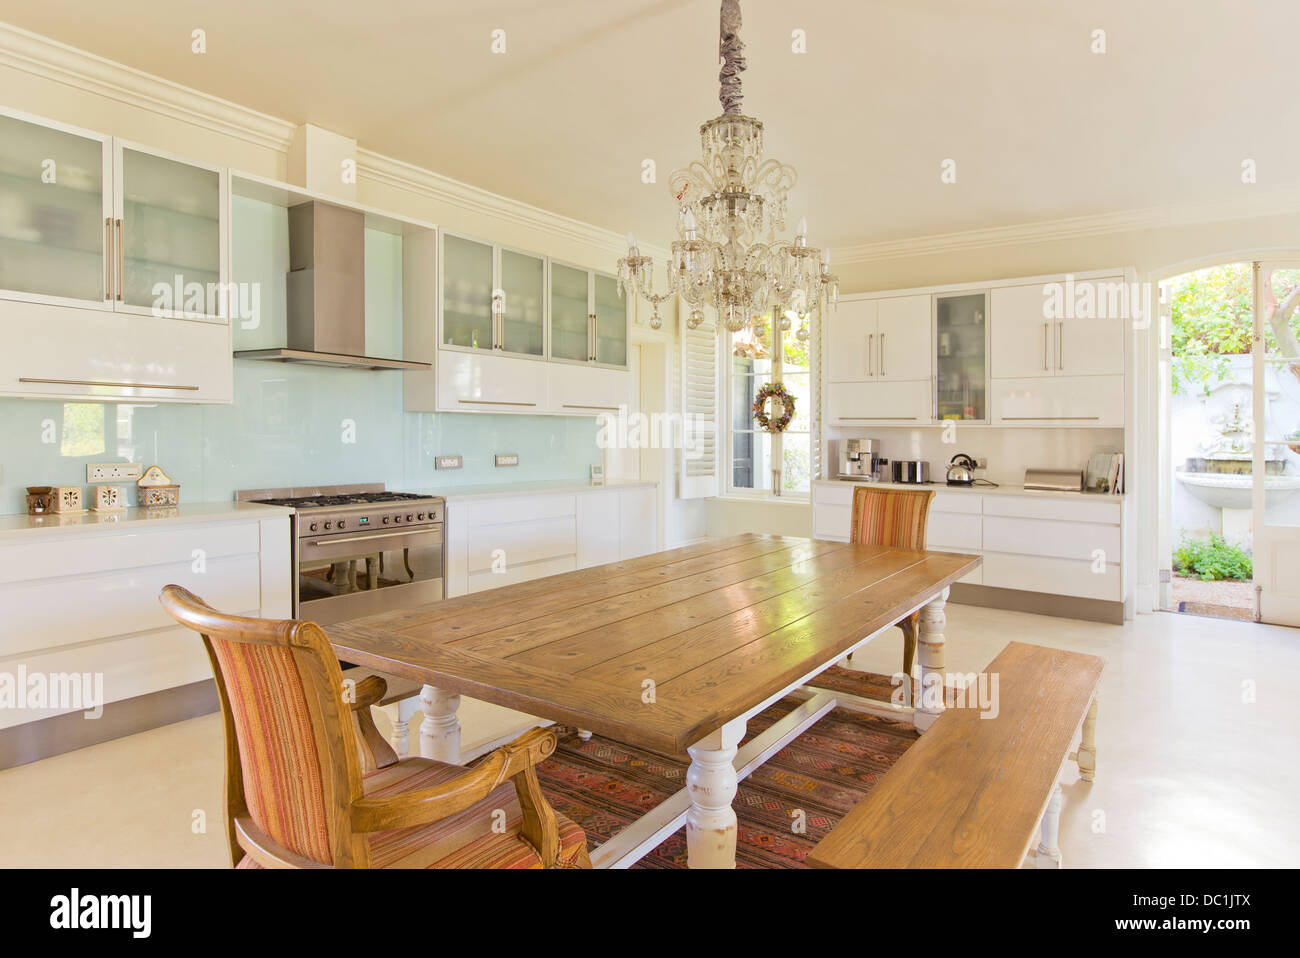 Chandelier over wooden table in kitchen Stock Photo